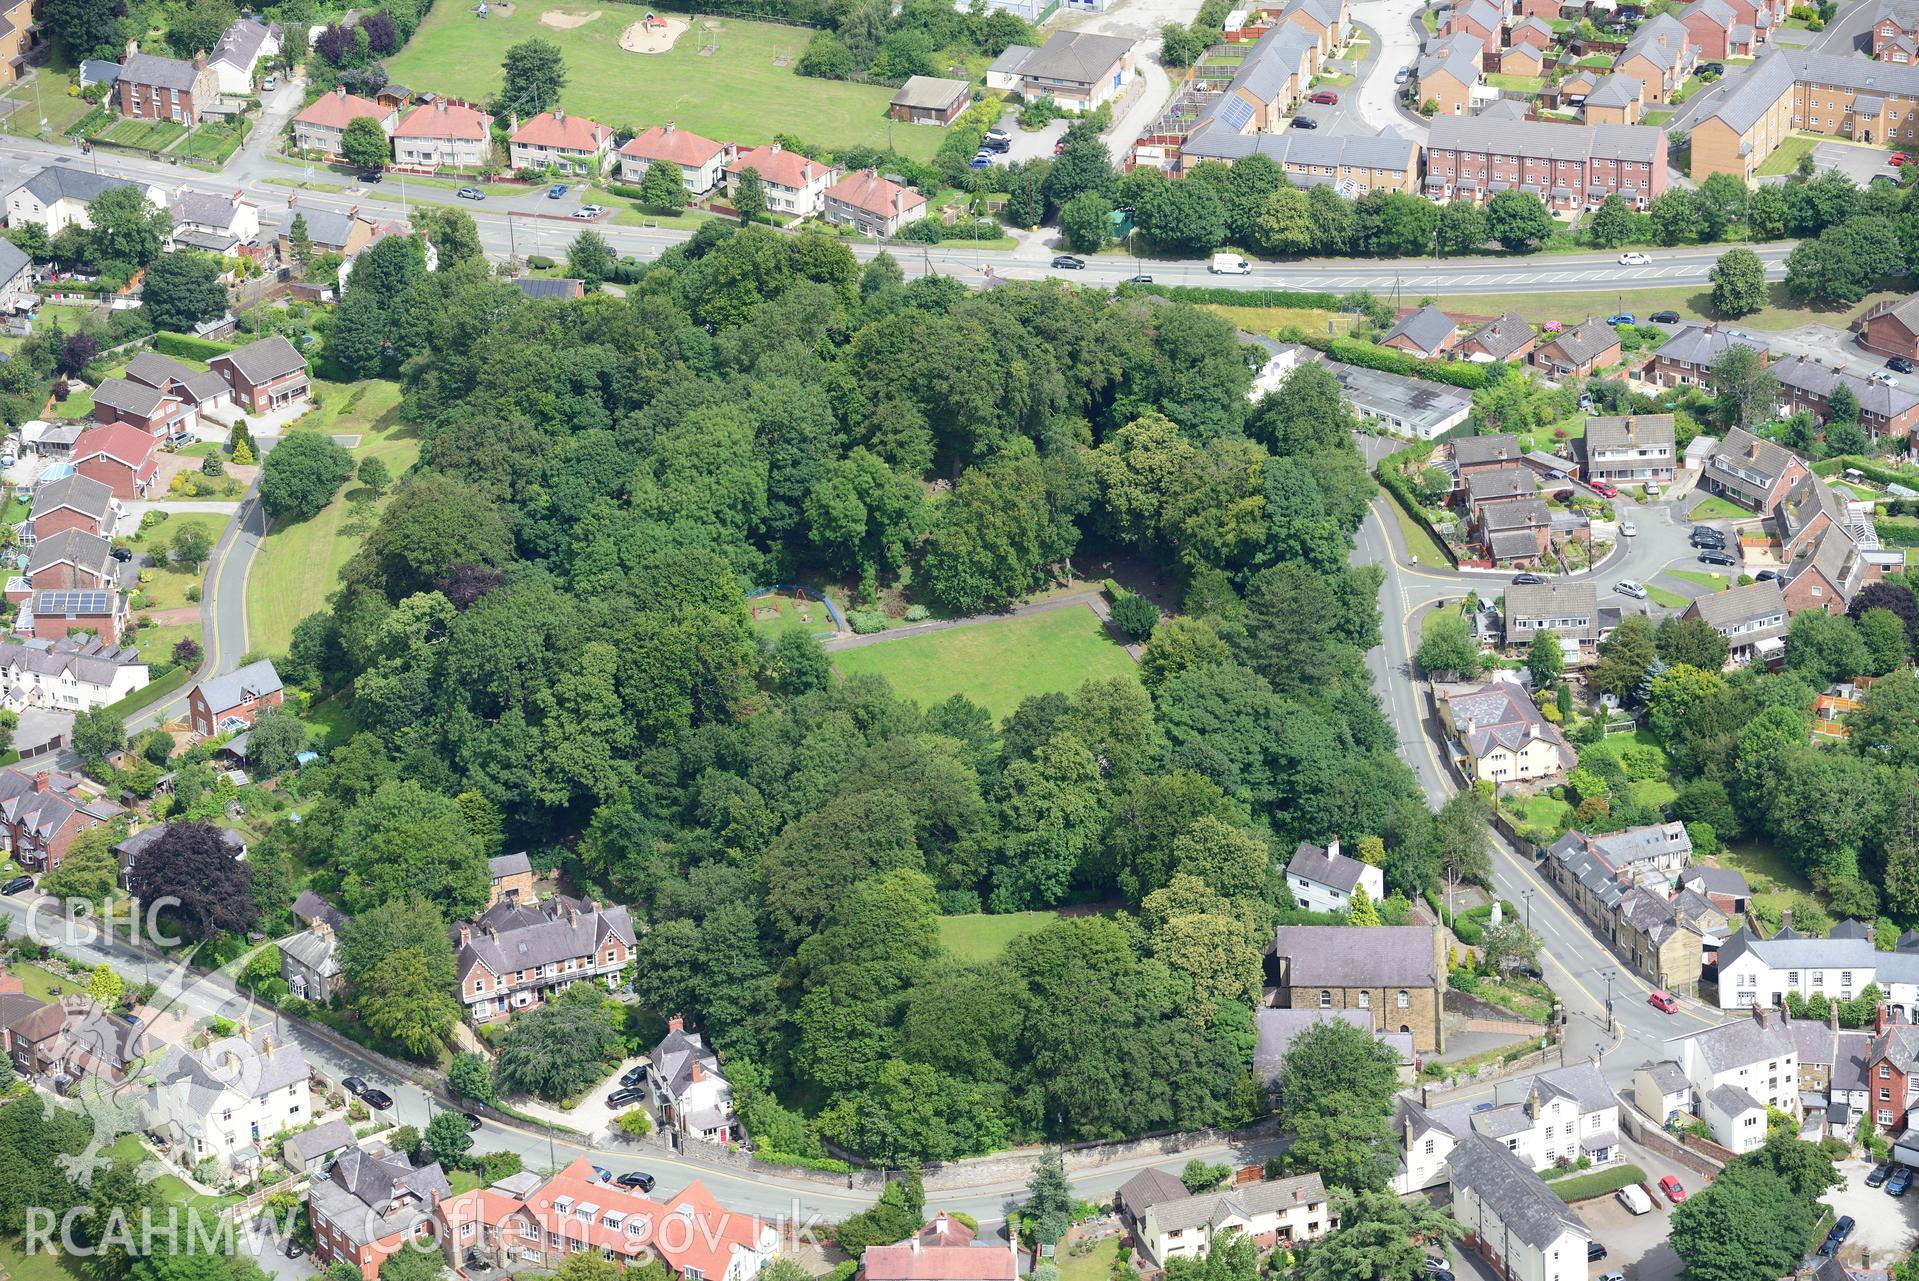 Mold Castle, Bailey Hill and Pendref Methodist Church, Mold. Oblique aerial photograph taken during the Royal Commission's programme of archaeological aerial reconnaissance by Toby Driver on 30th July 2015.